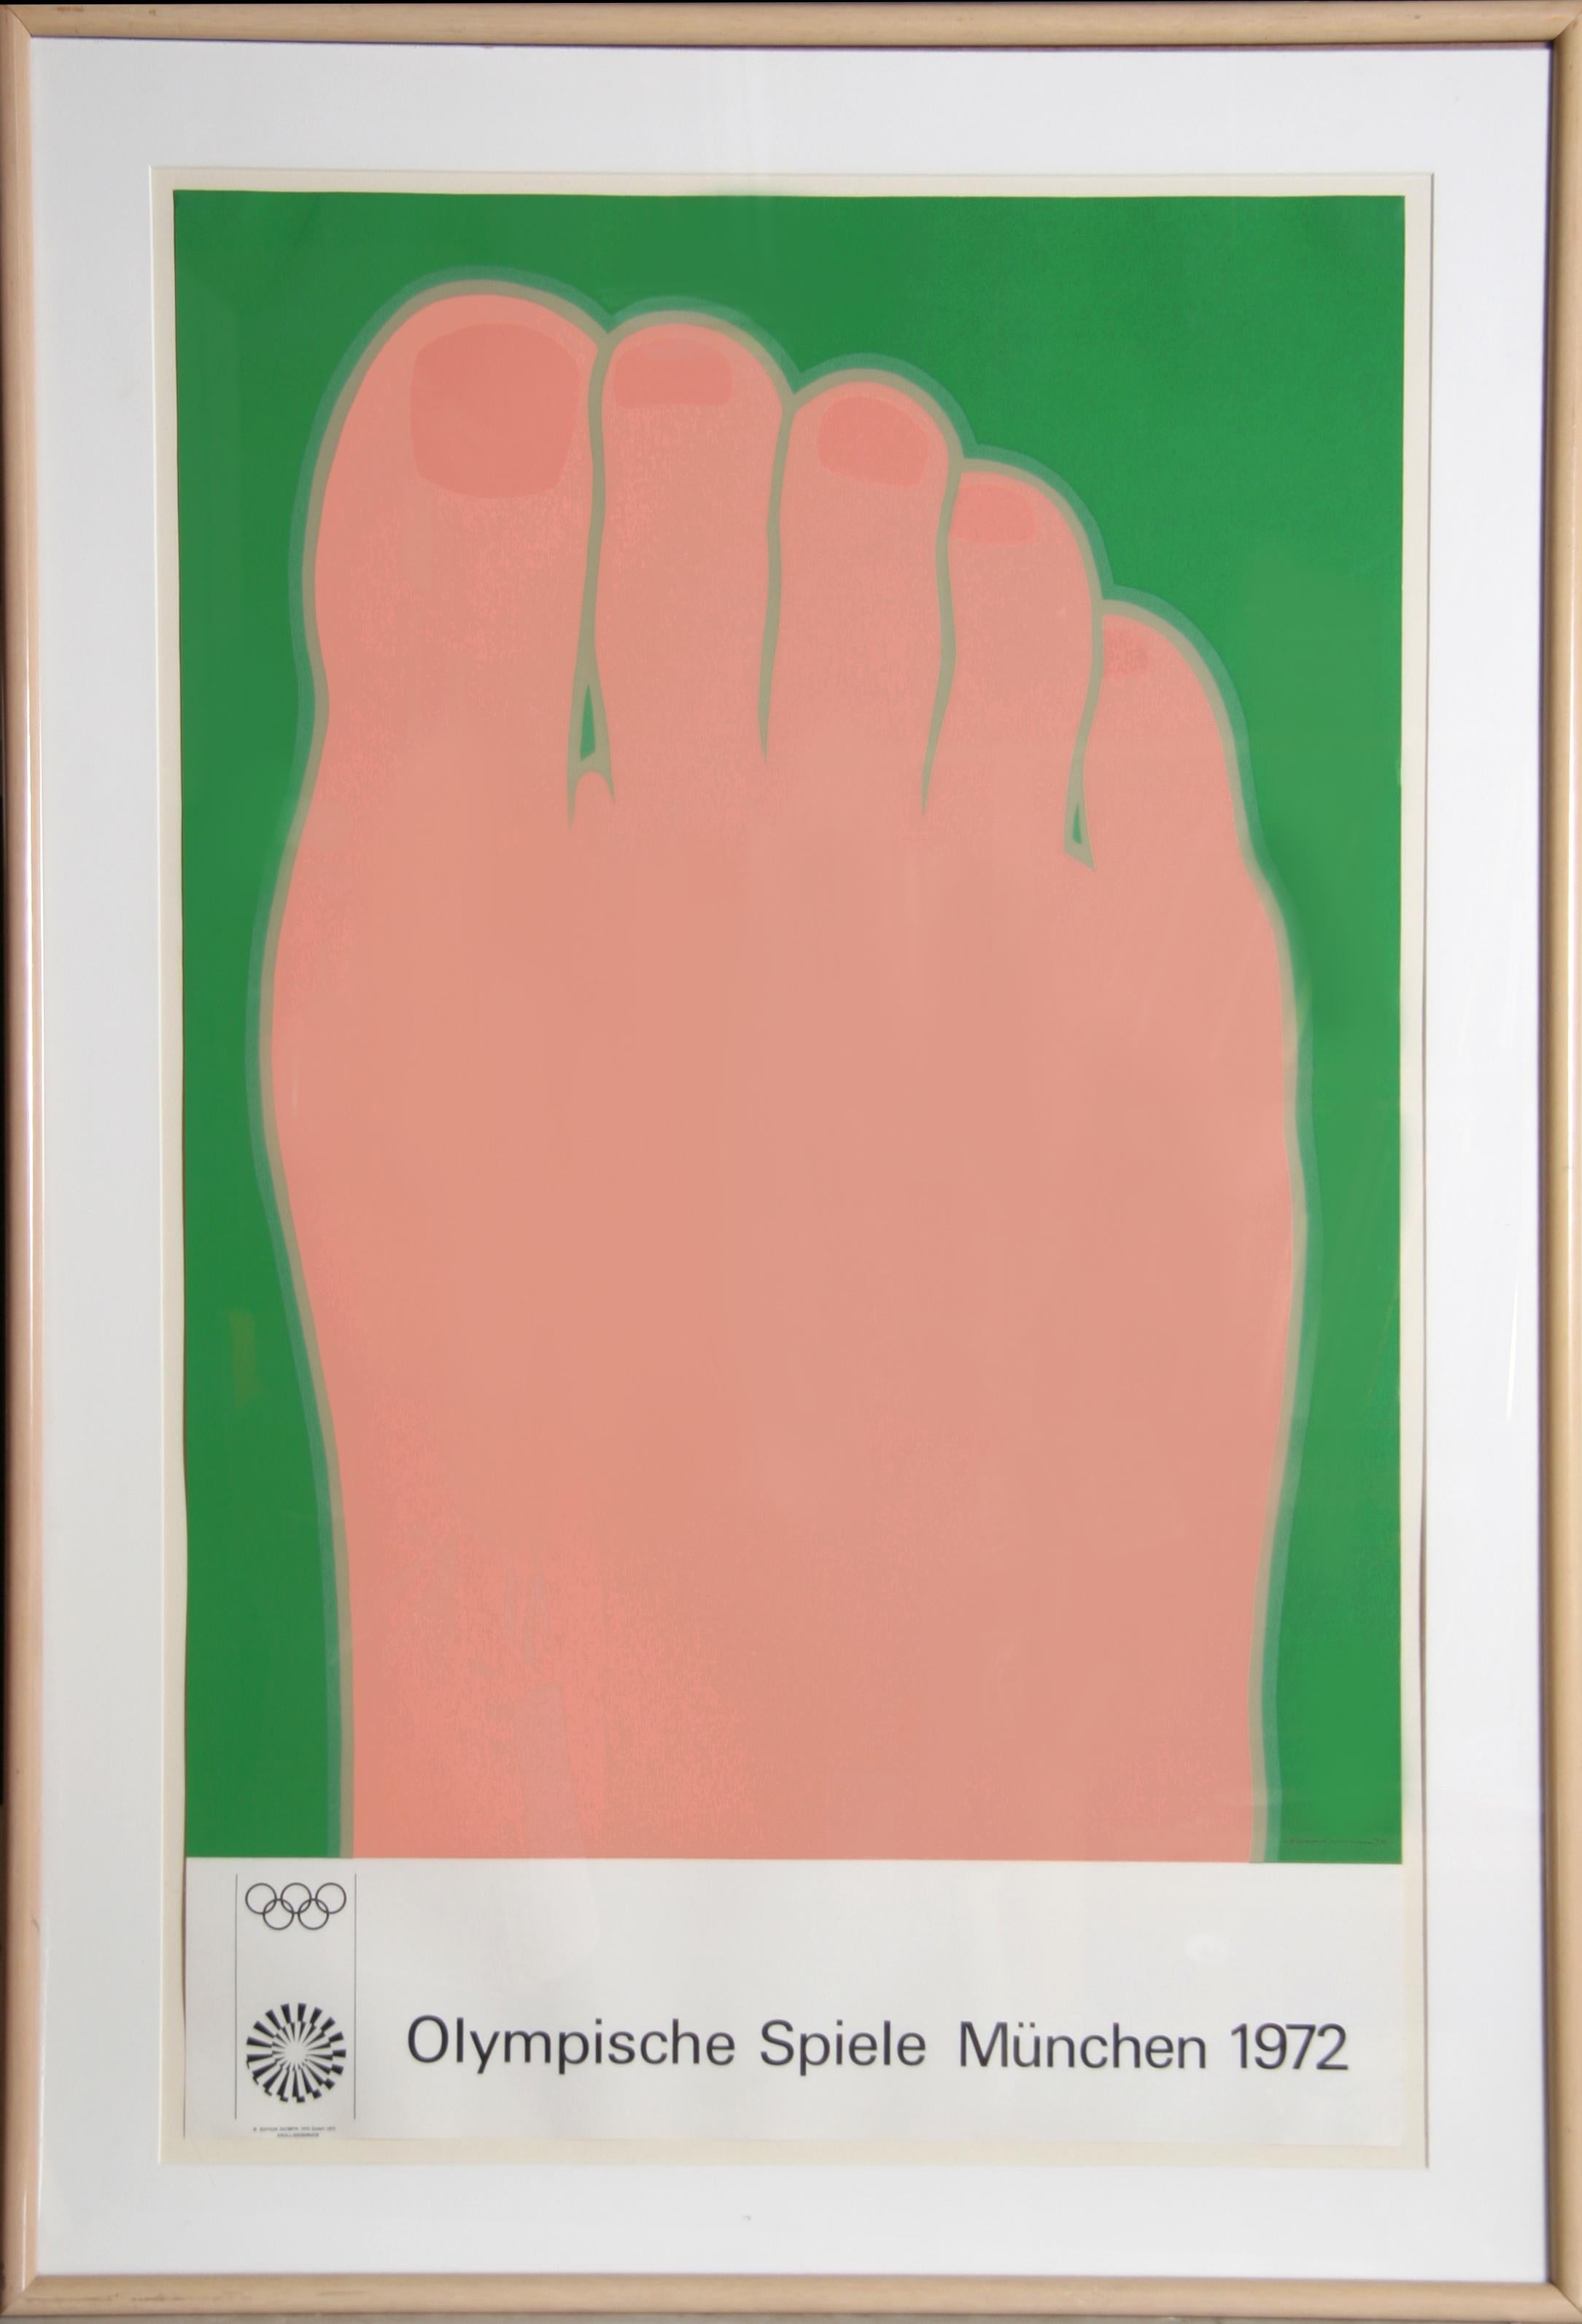 Artist: Tom Wesselmann (1931 - 2004)
Title: Olympische Spiele Muenchen (Foot)
Year: 1972
Medium: Lithograph Poster mounted on linen
Edition: 3000
Size: 40 in. x 25 in. (101.6 cm x 63.5 cm)
Frame Size: 45 x 30 inches